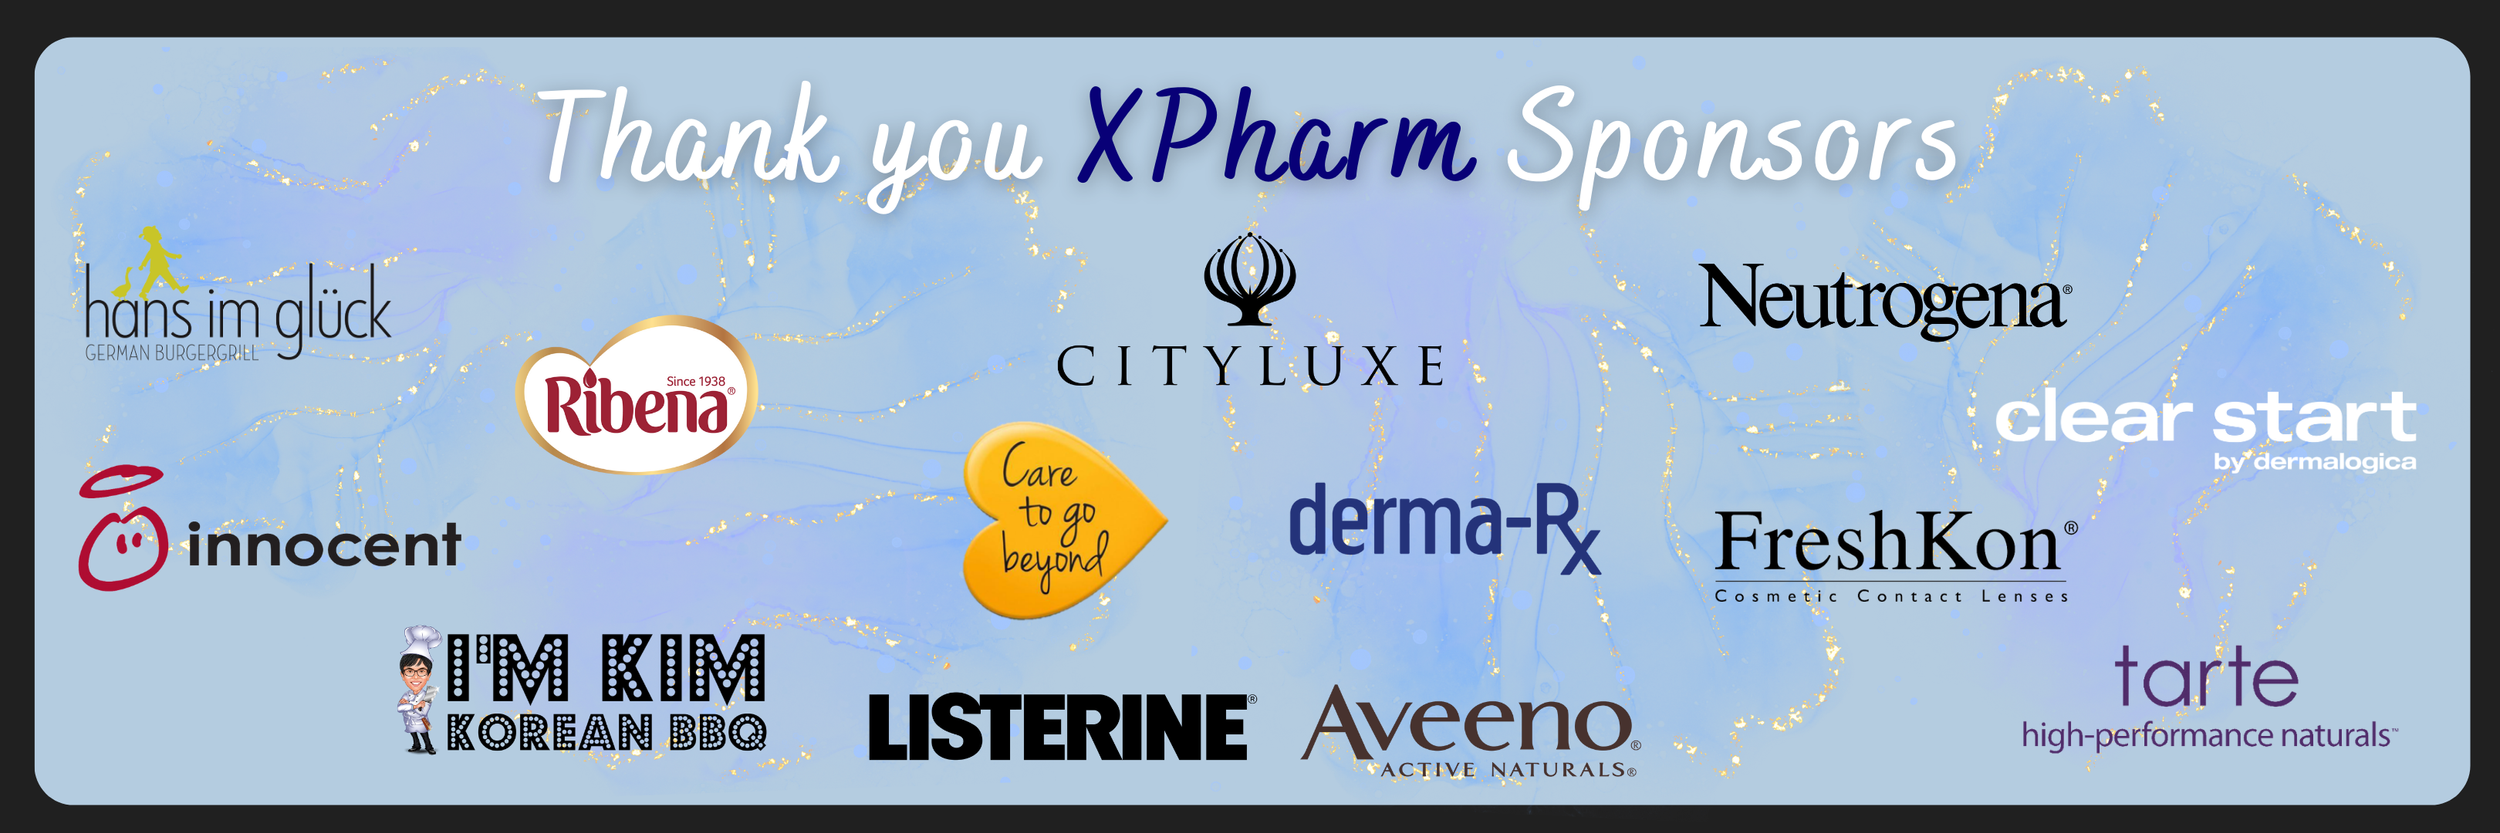 XPharm Product Sponsors.png